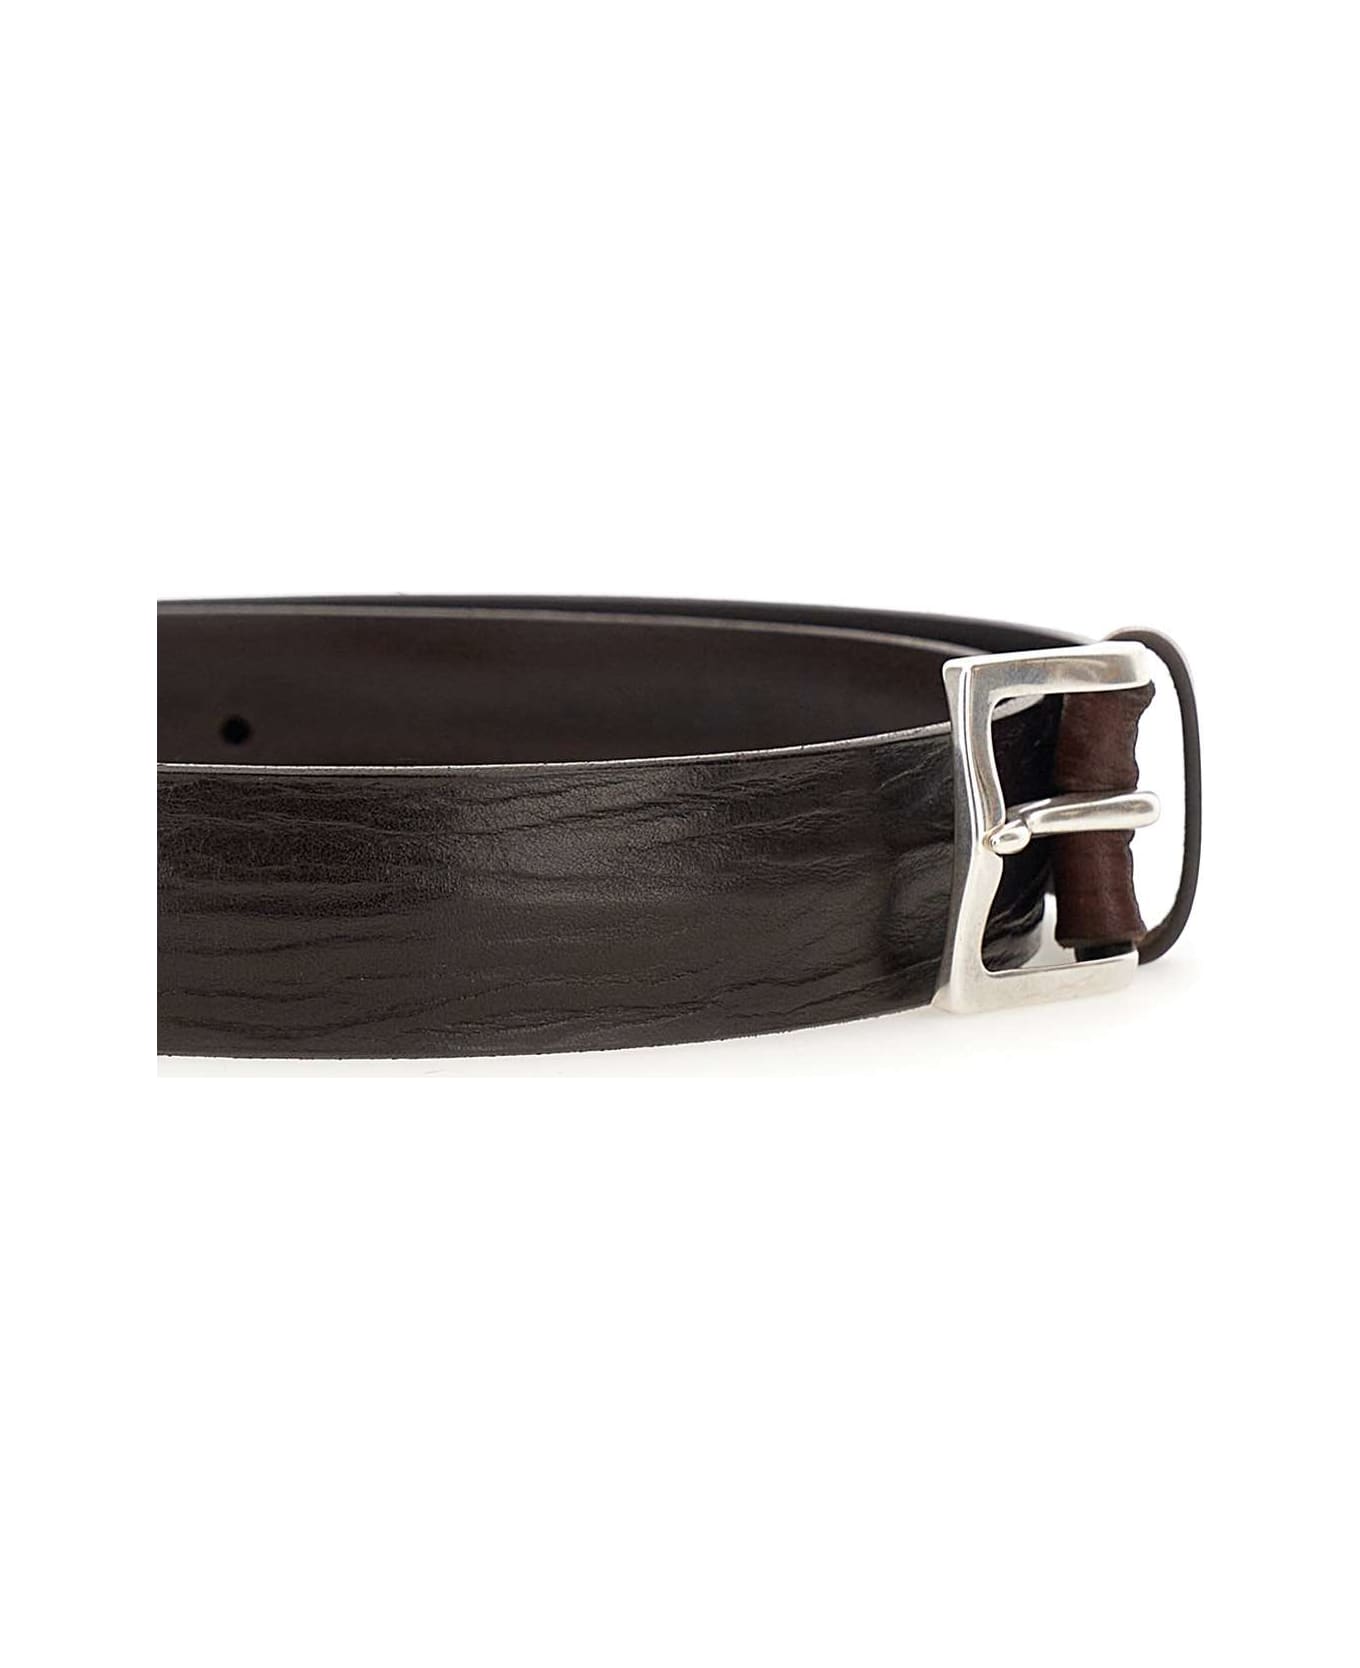 Orciani "blade" Leather Belt - BROWN